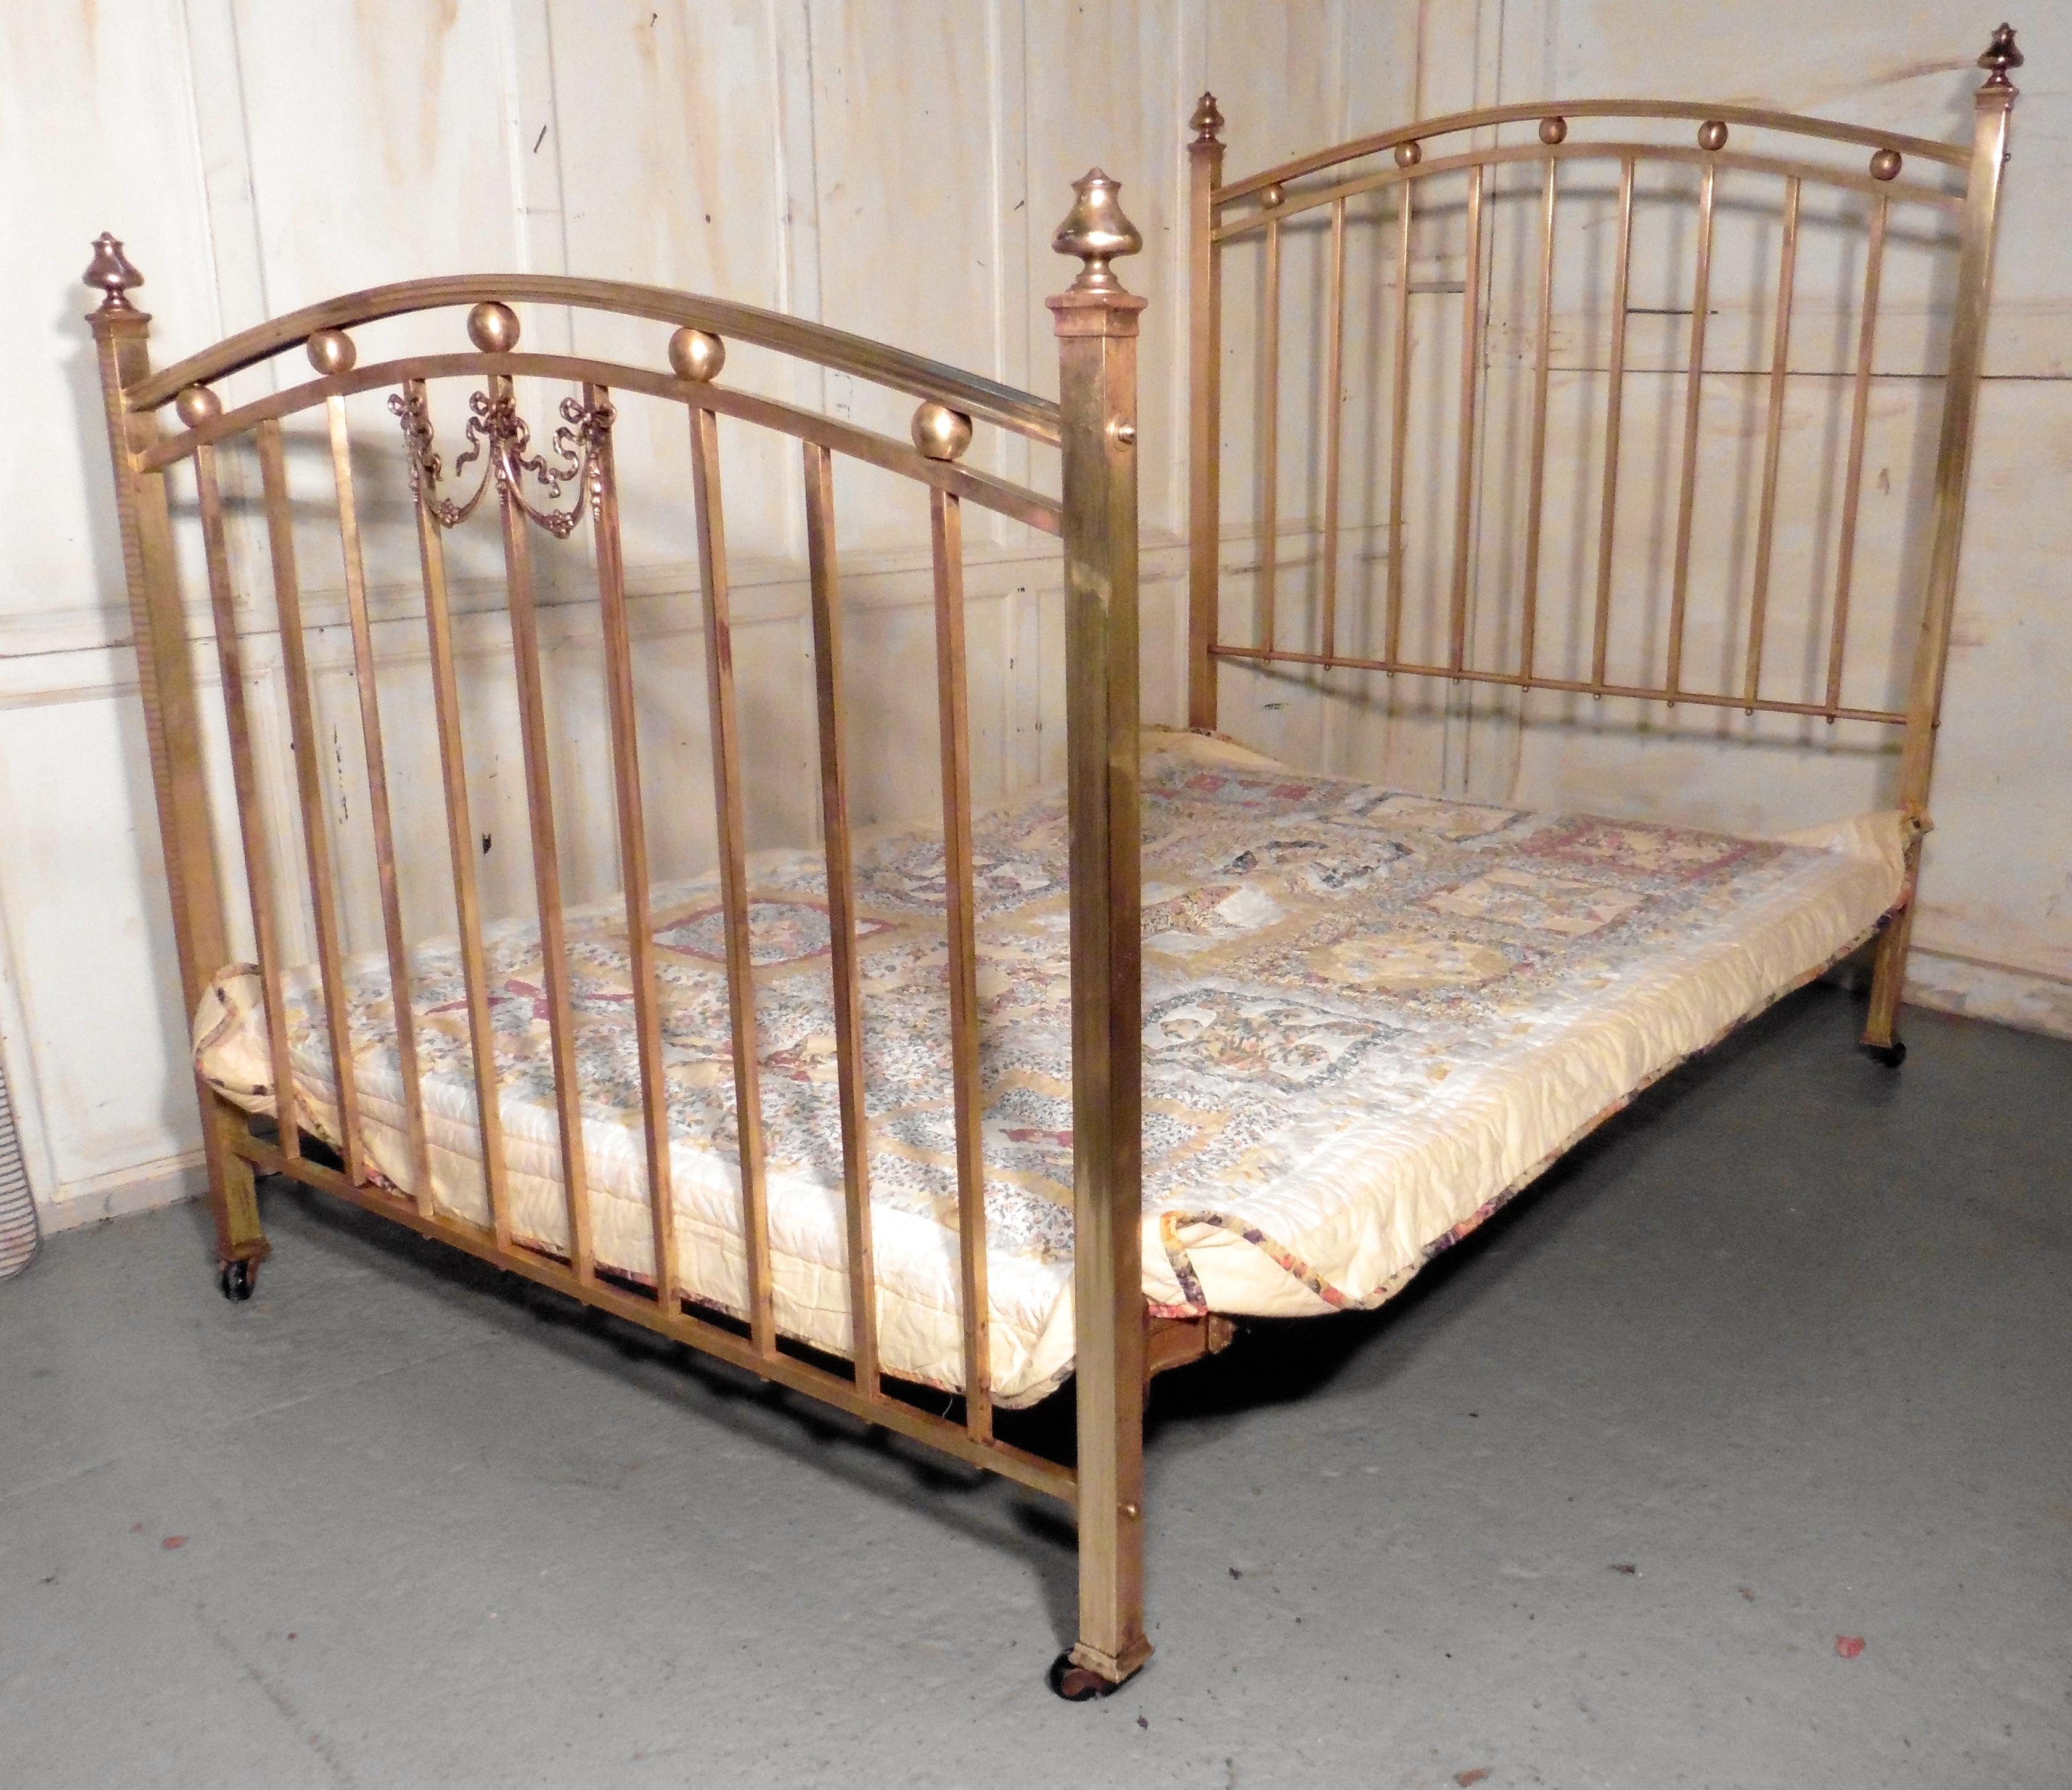 A lovely Victorian brass double bed

The bed dates from circa 1880, both head and foot board are high with a curved top rail, it is decorated with brass balls and rails with turned bed knobs at each end, there is a also a ribbon and swag